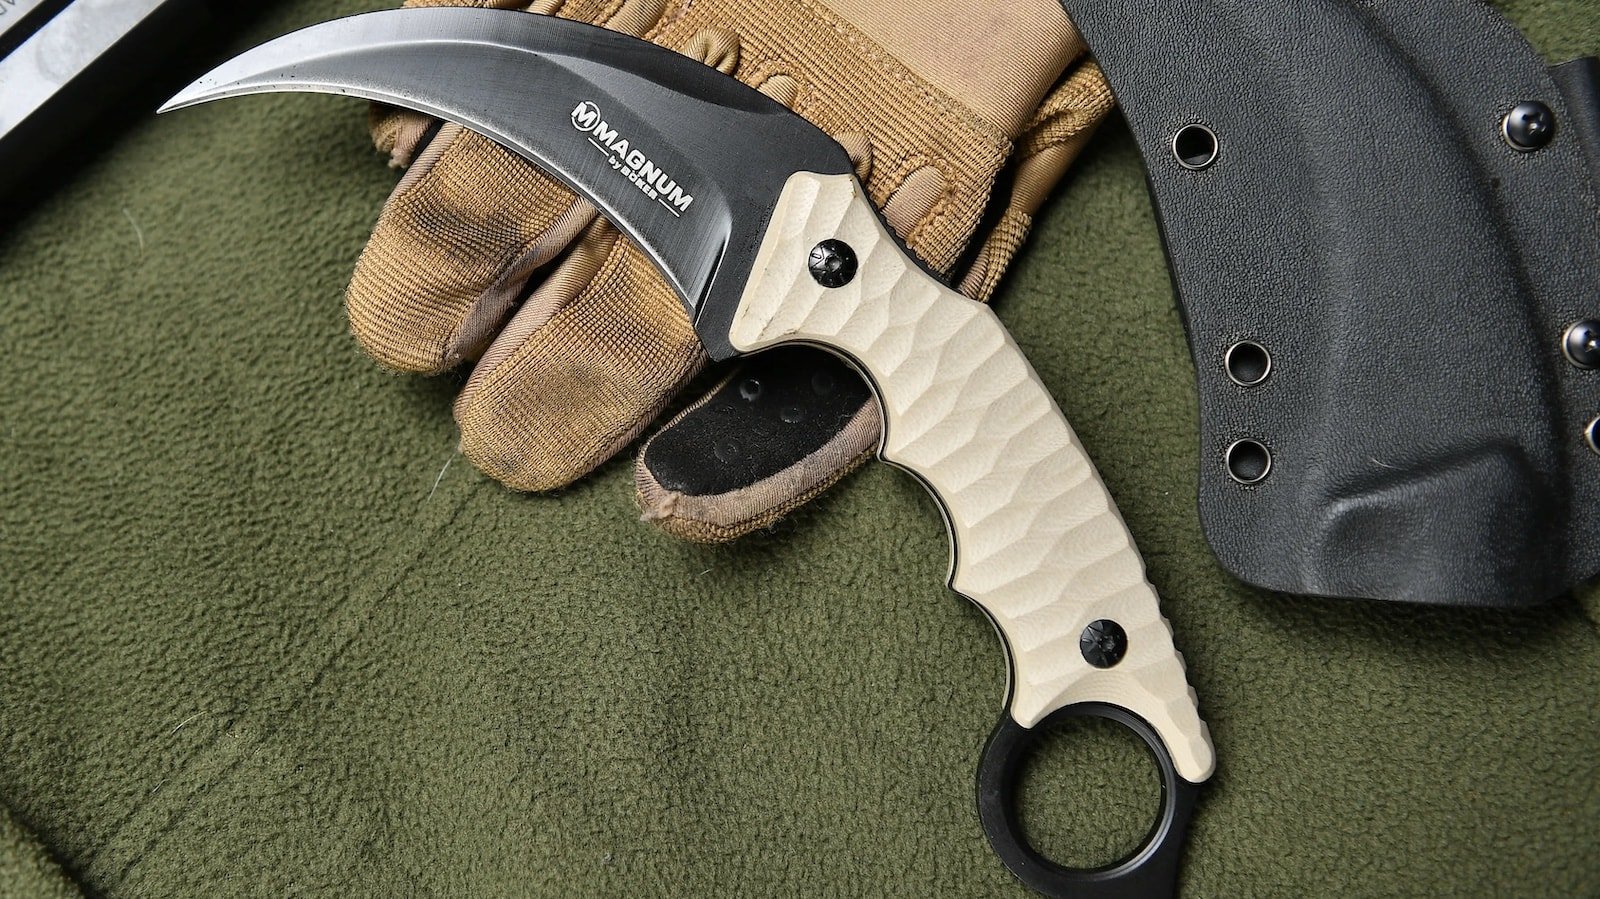 Fixed blade Karambit knife is solidly durable and offers fantastic reliability